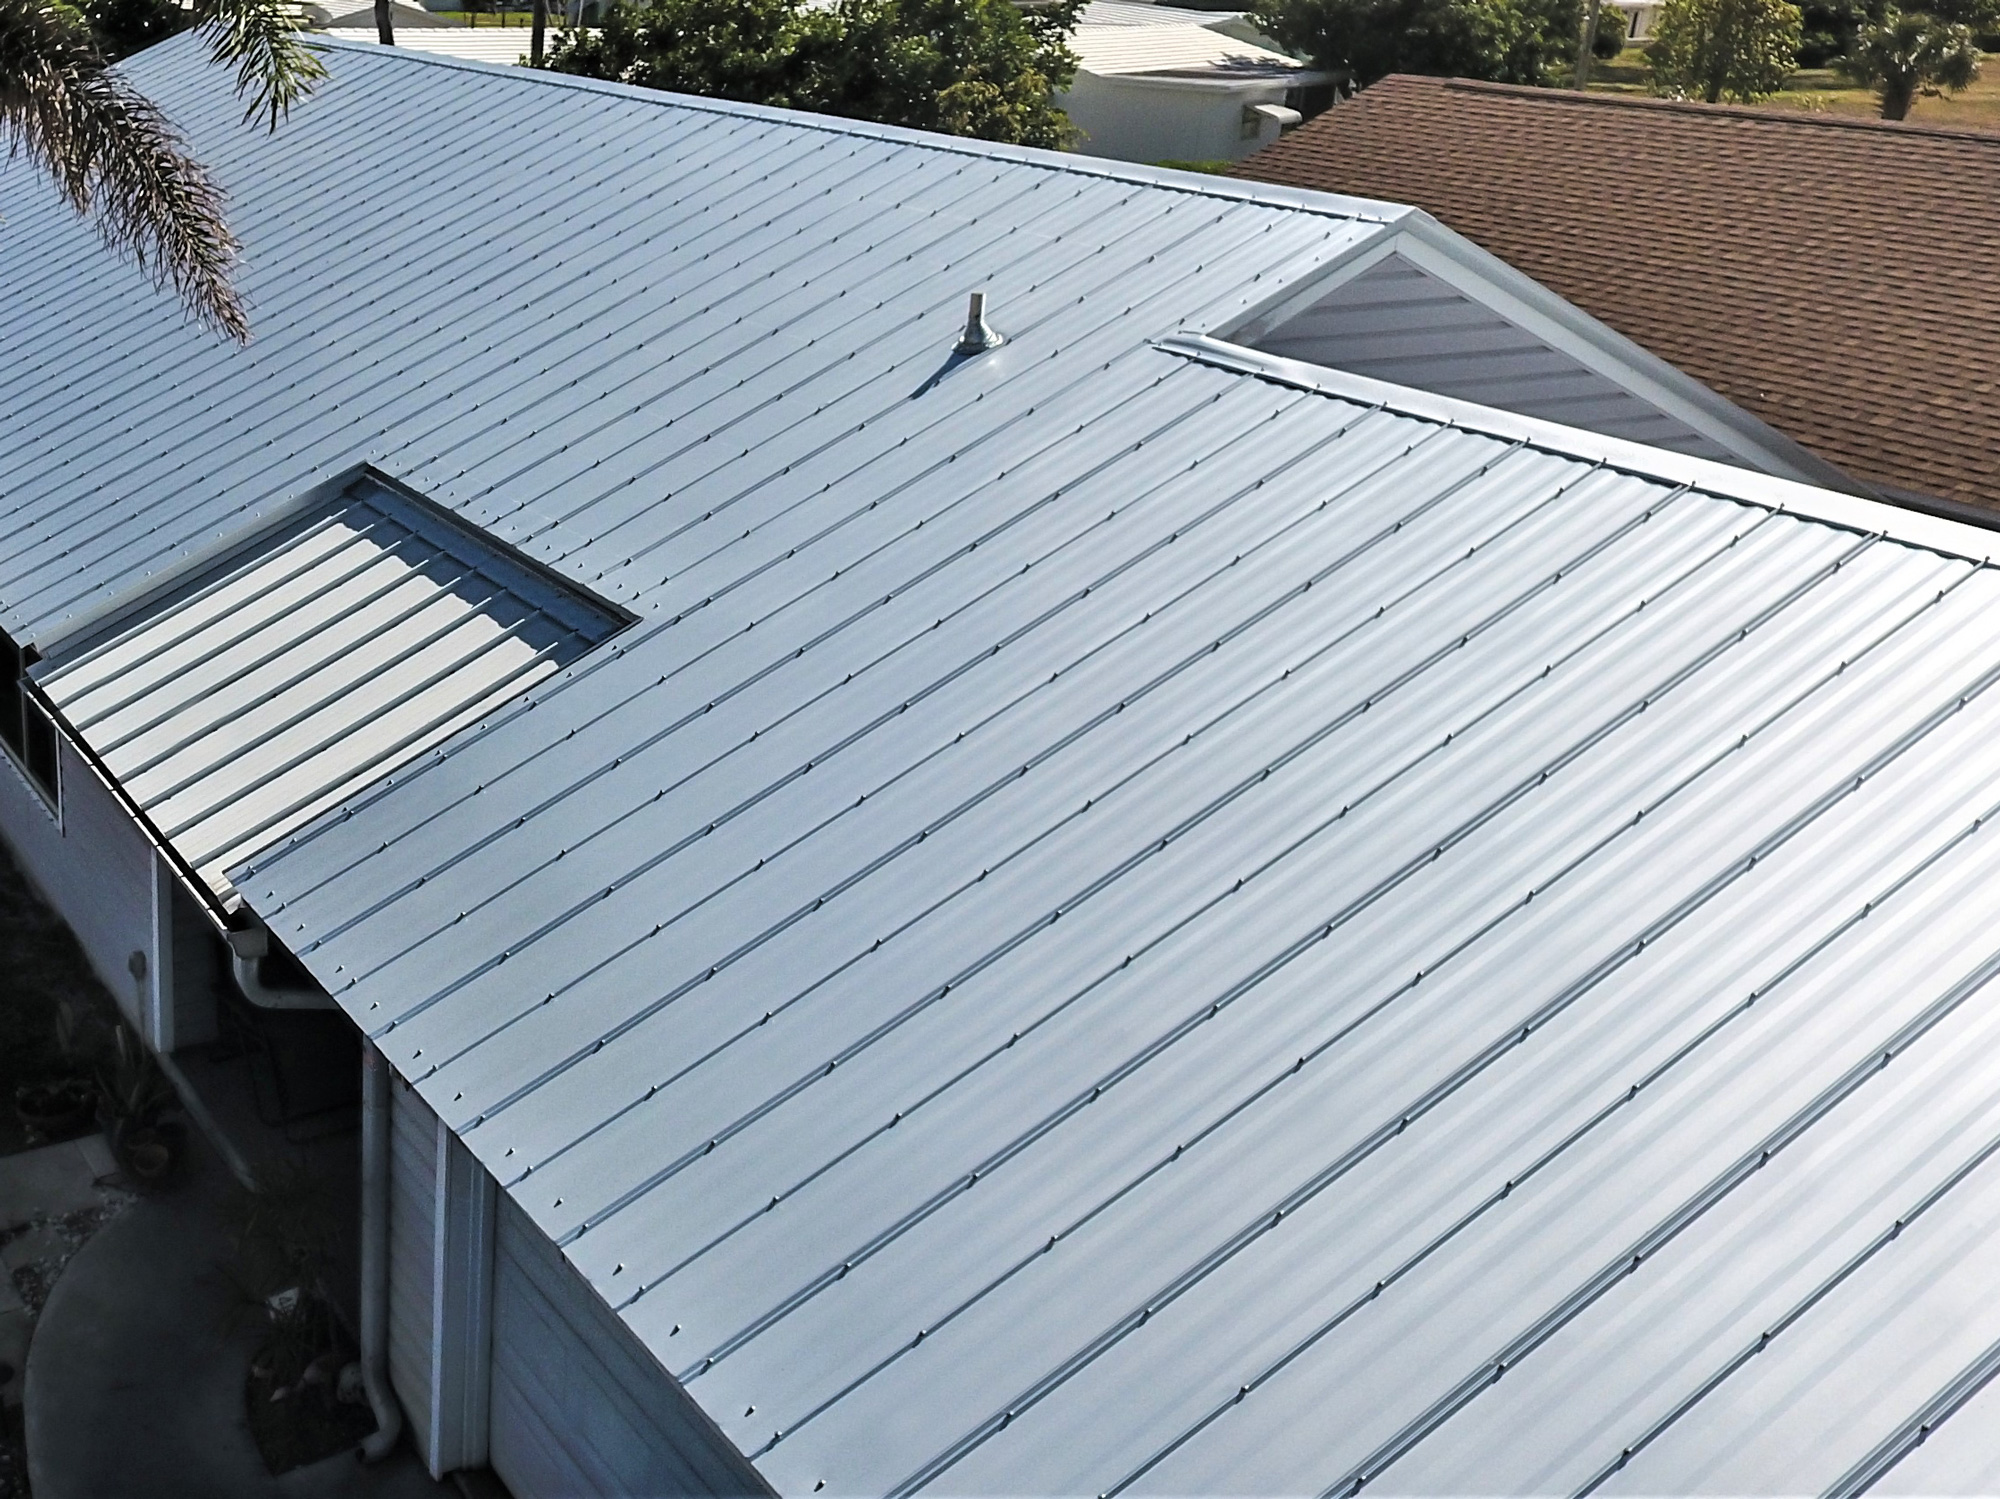 DM Class 500 Dynamic Metals High quality metal roofing panels and accessories